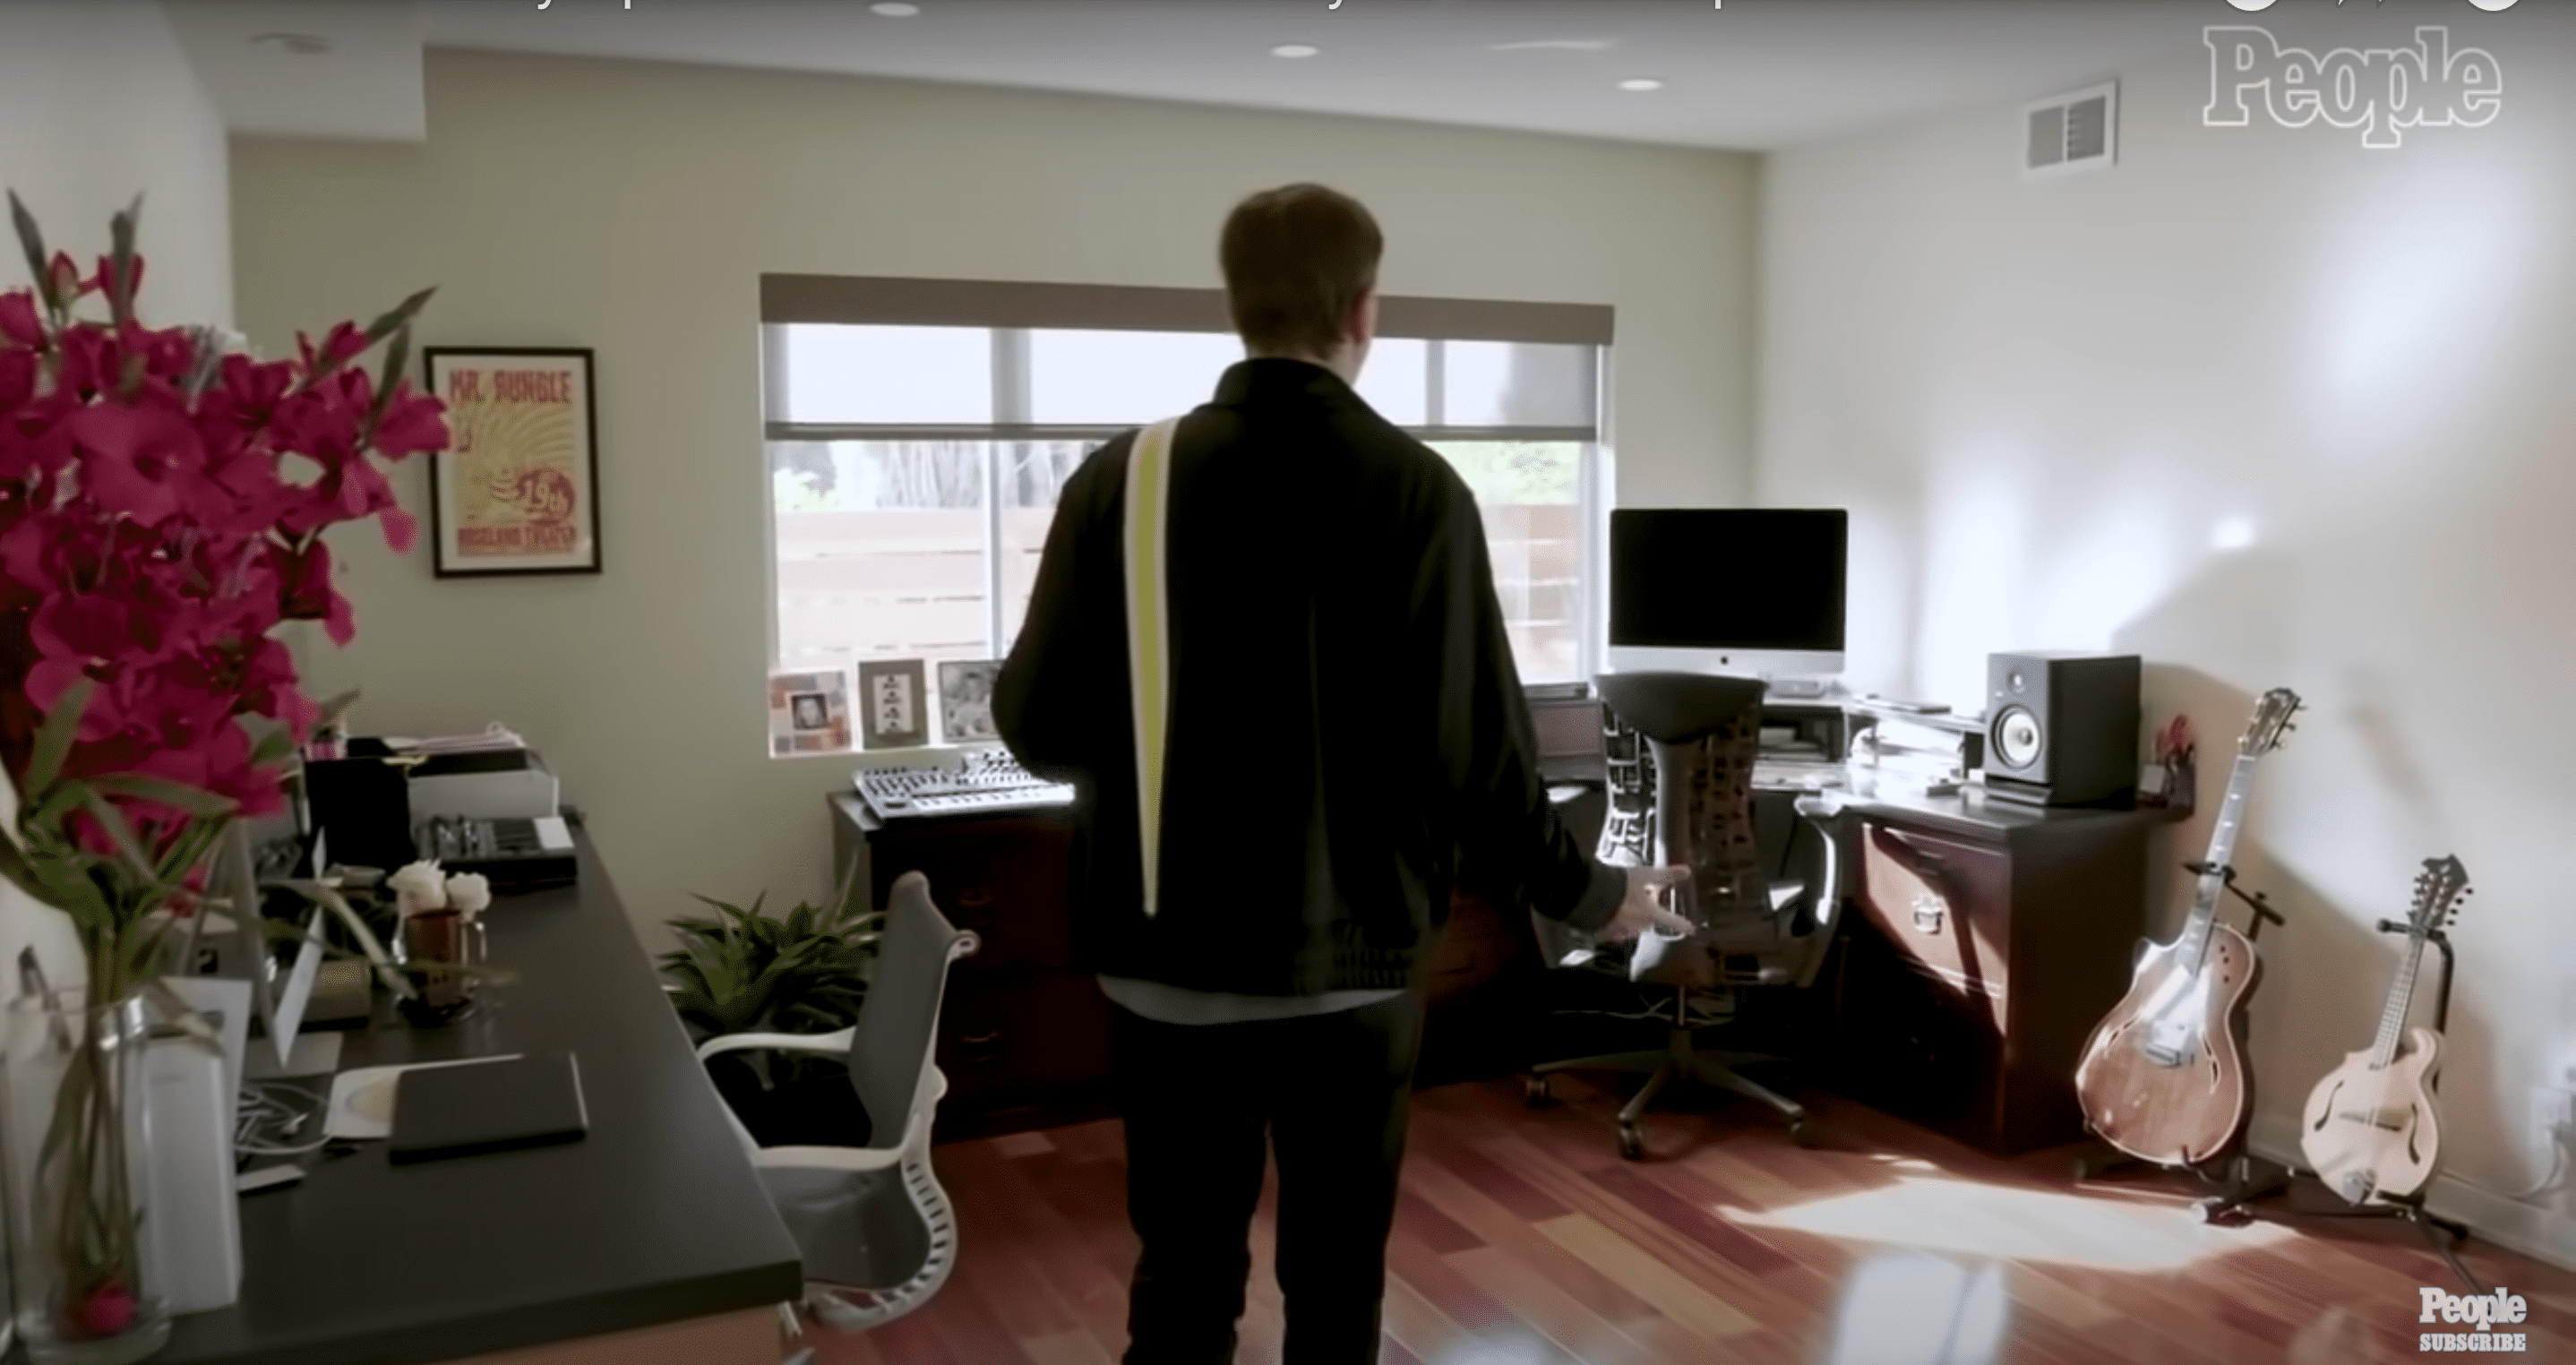 Sean Murray showing off his Encino, California home to People magazine on March 15, 2021 | Source: YouTube/People